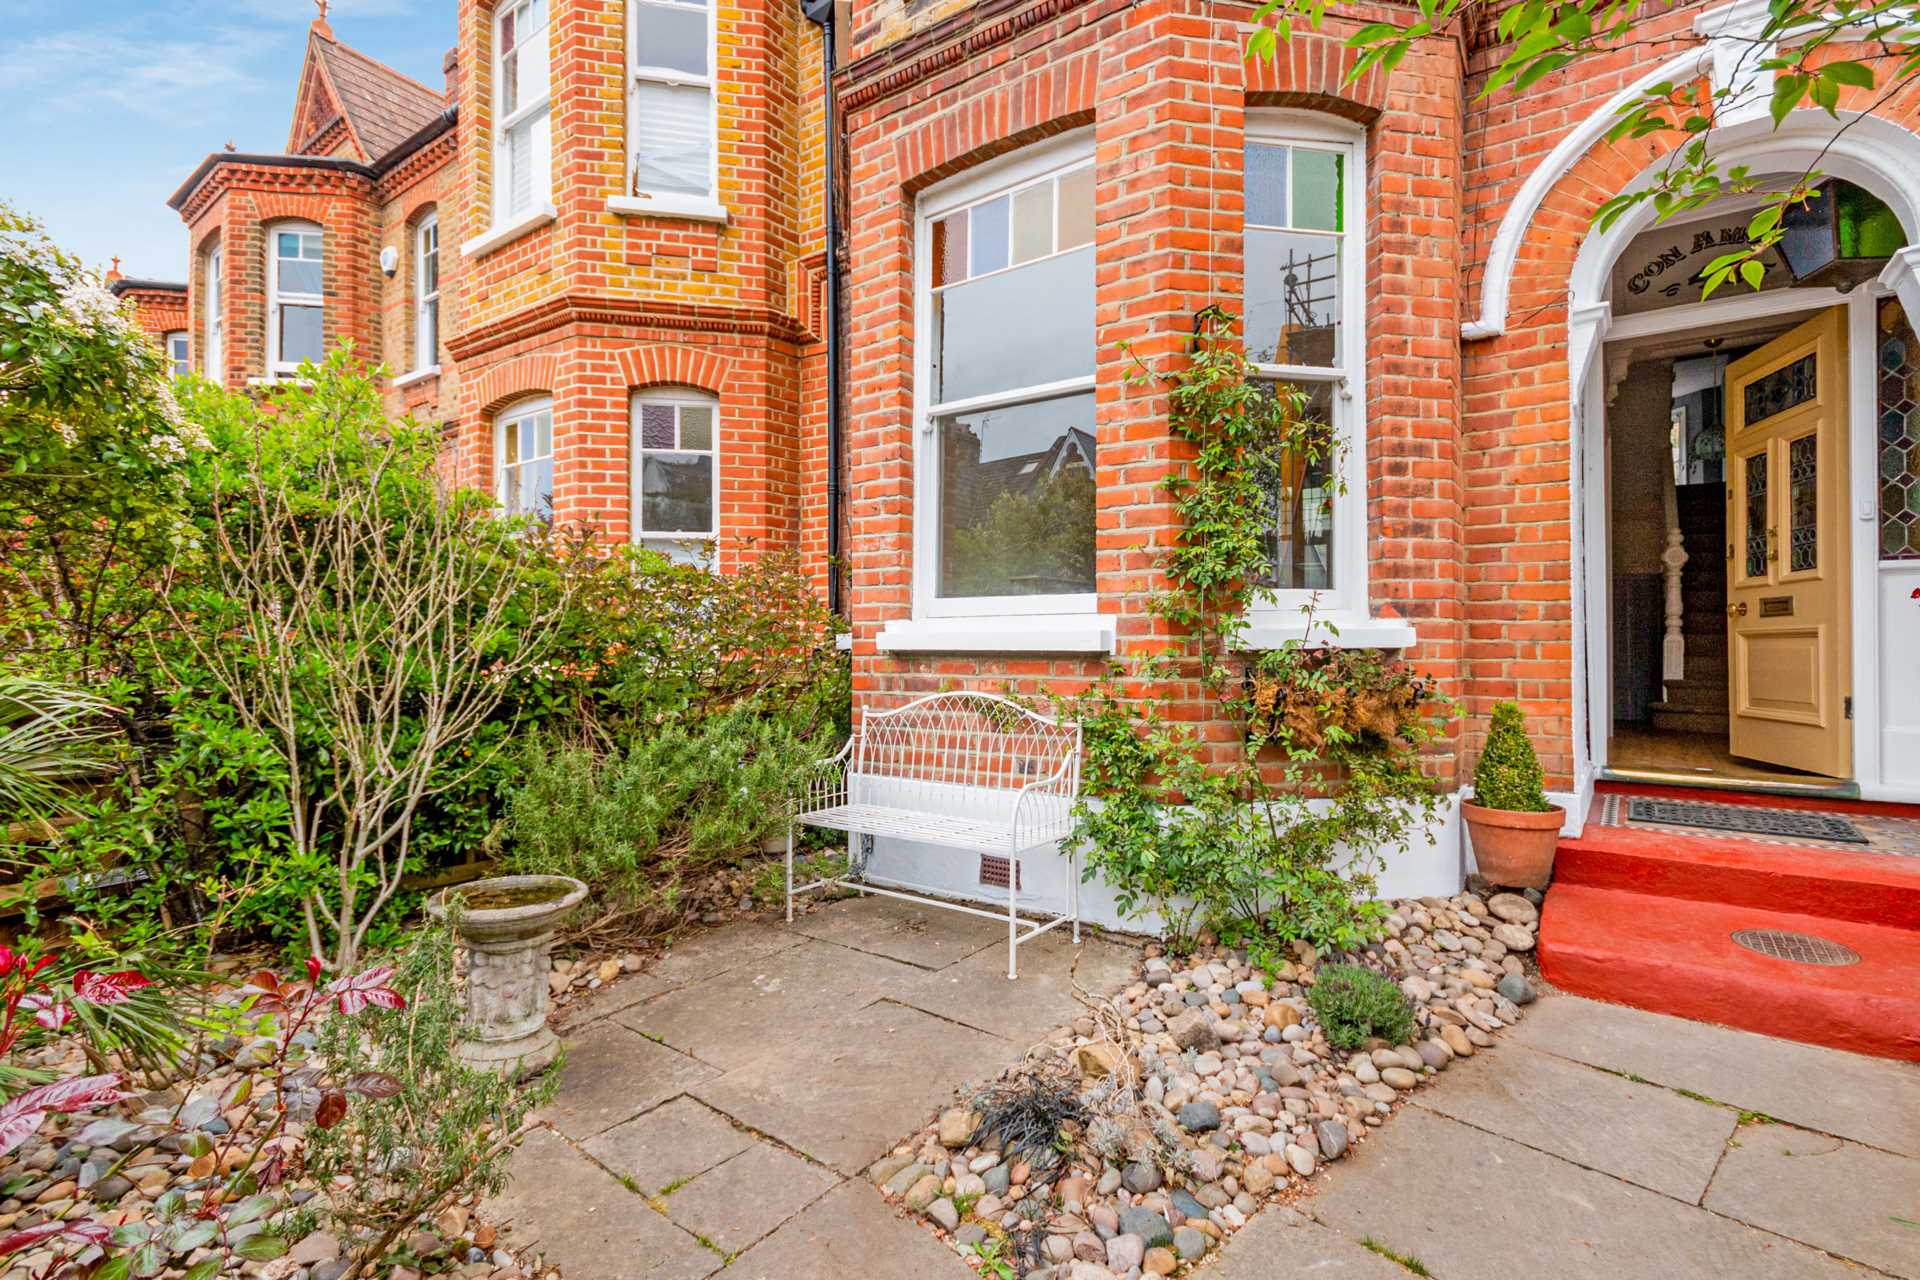 Beauval Road, Dulwich, SE22, Image 22